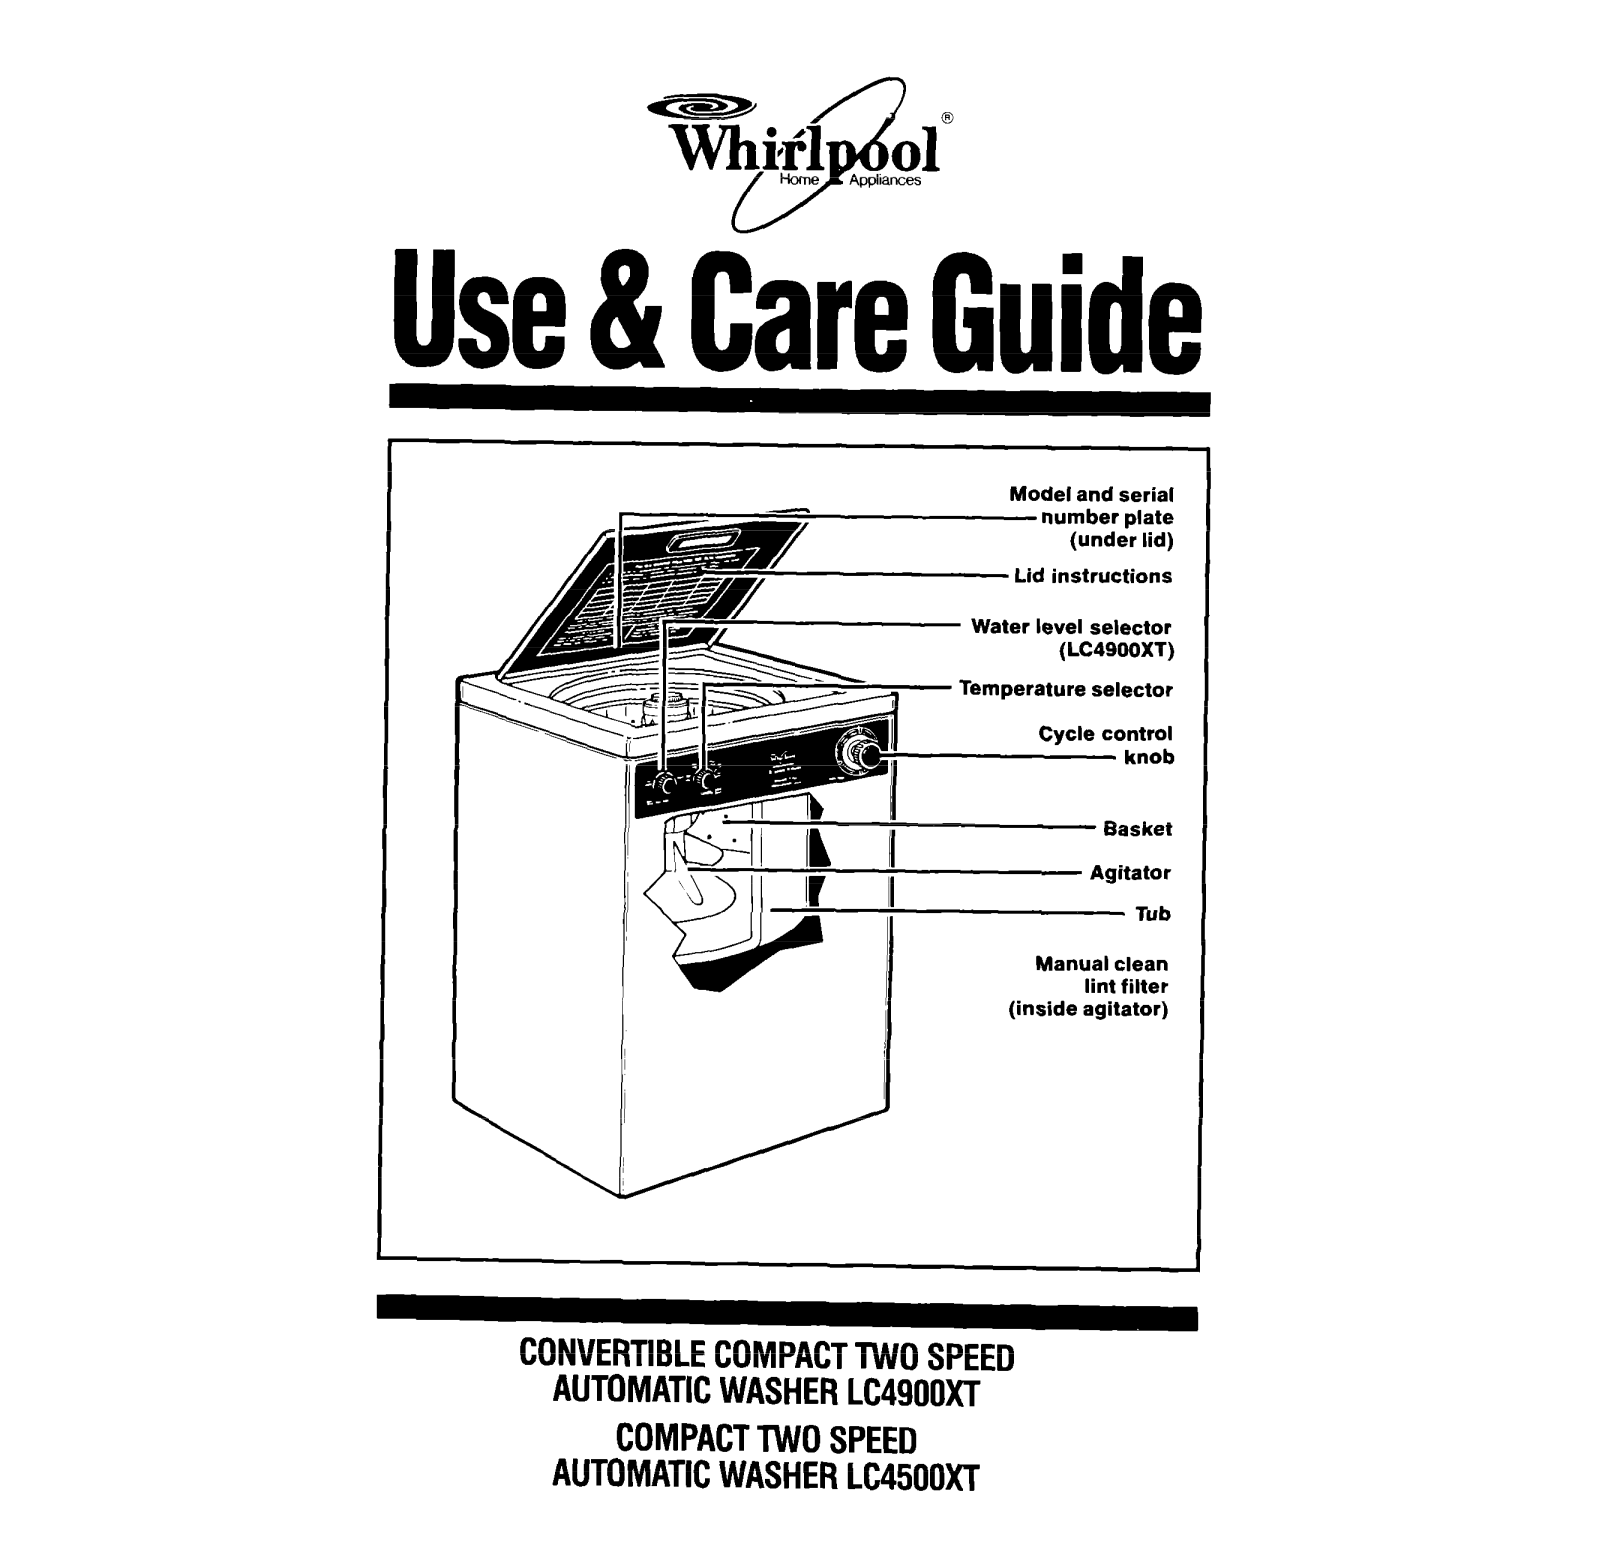 Whirlpool LC4900XT Owner's Manual